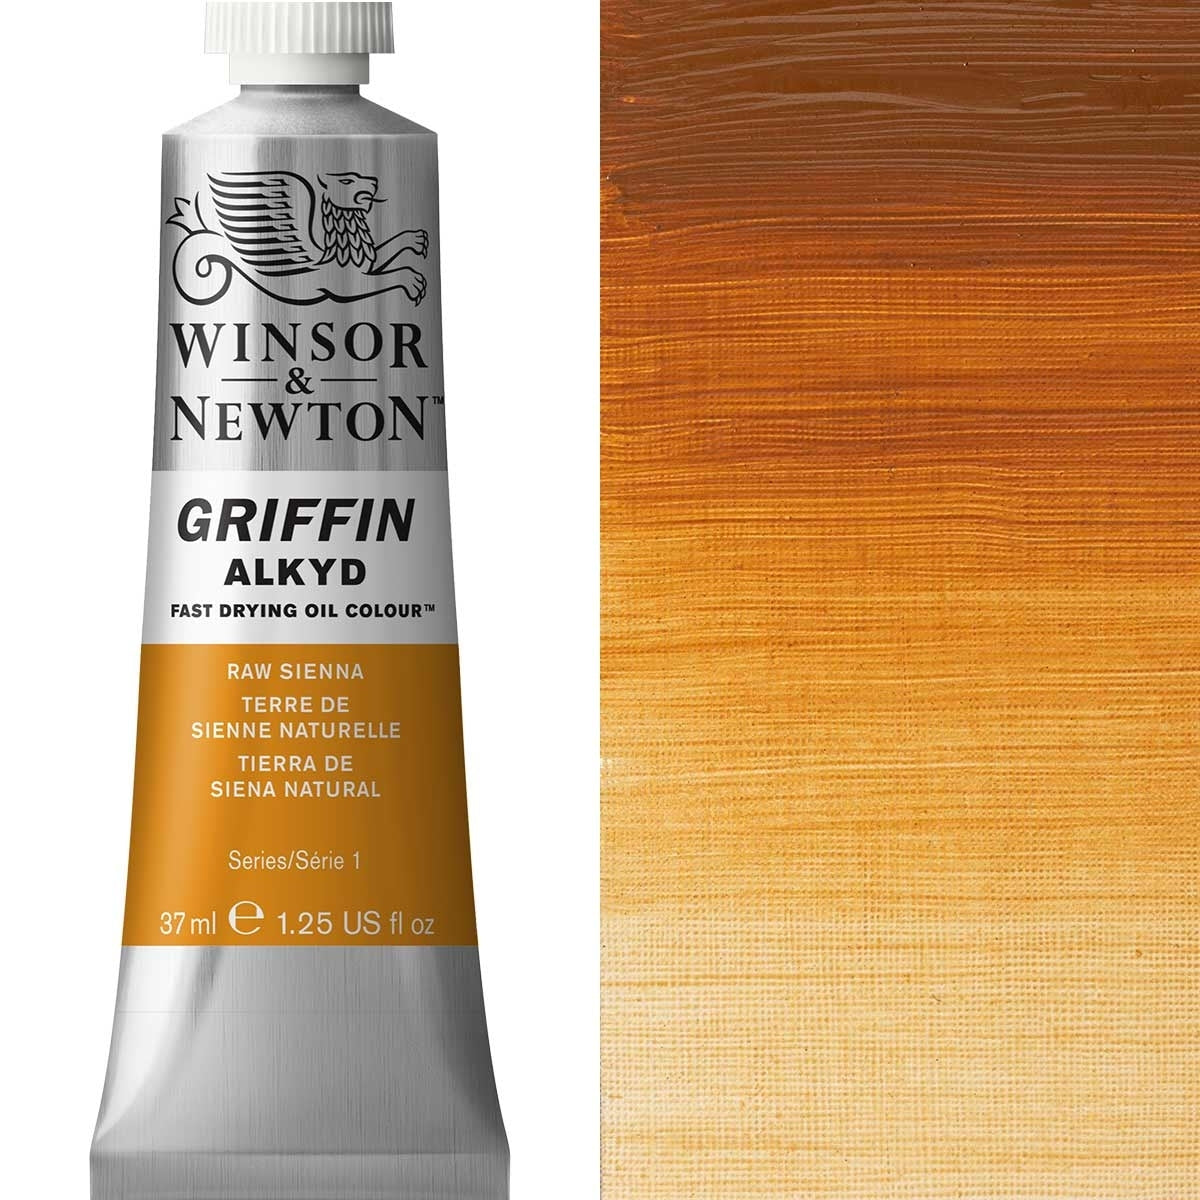 Winsor and Newton - Griffin ALKYD Oil Colour - 37ml - Raw Sienna